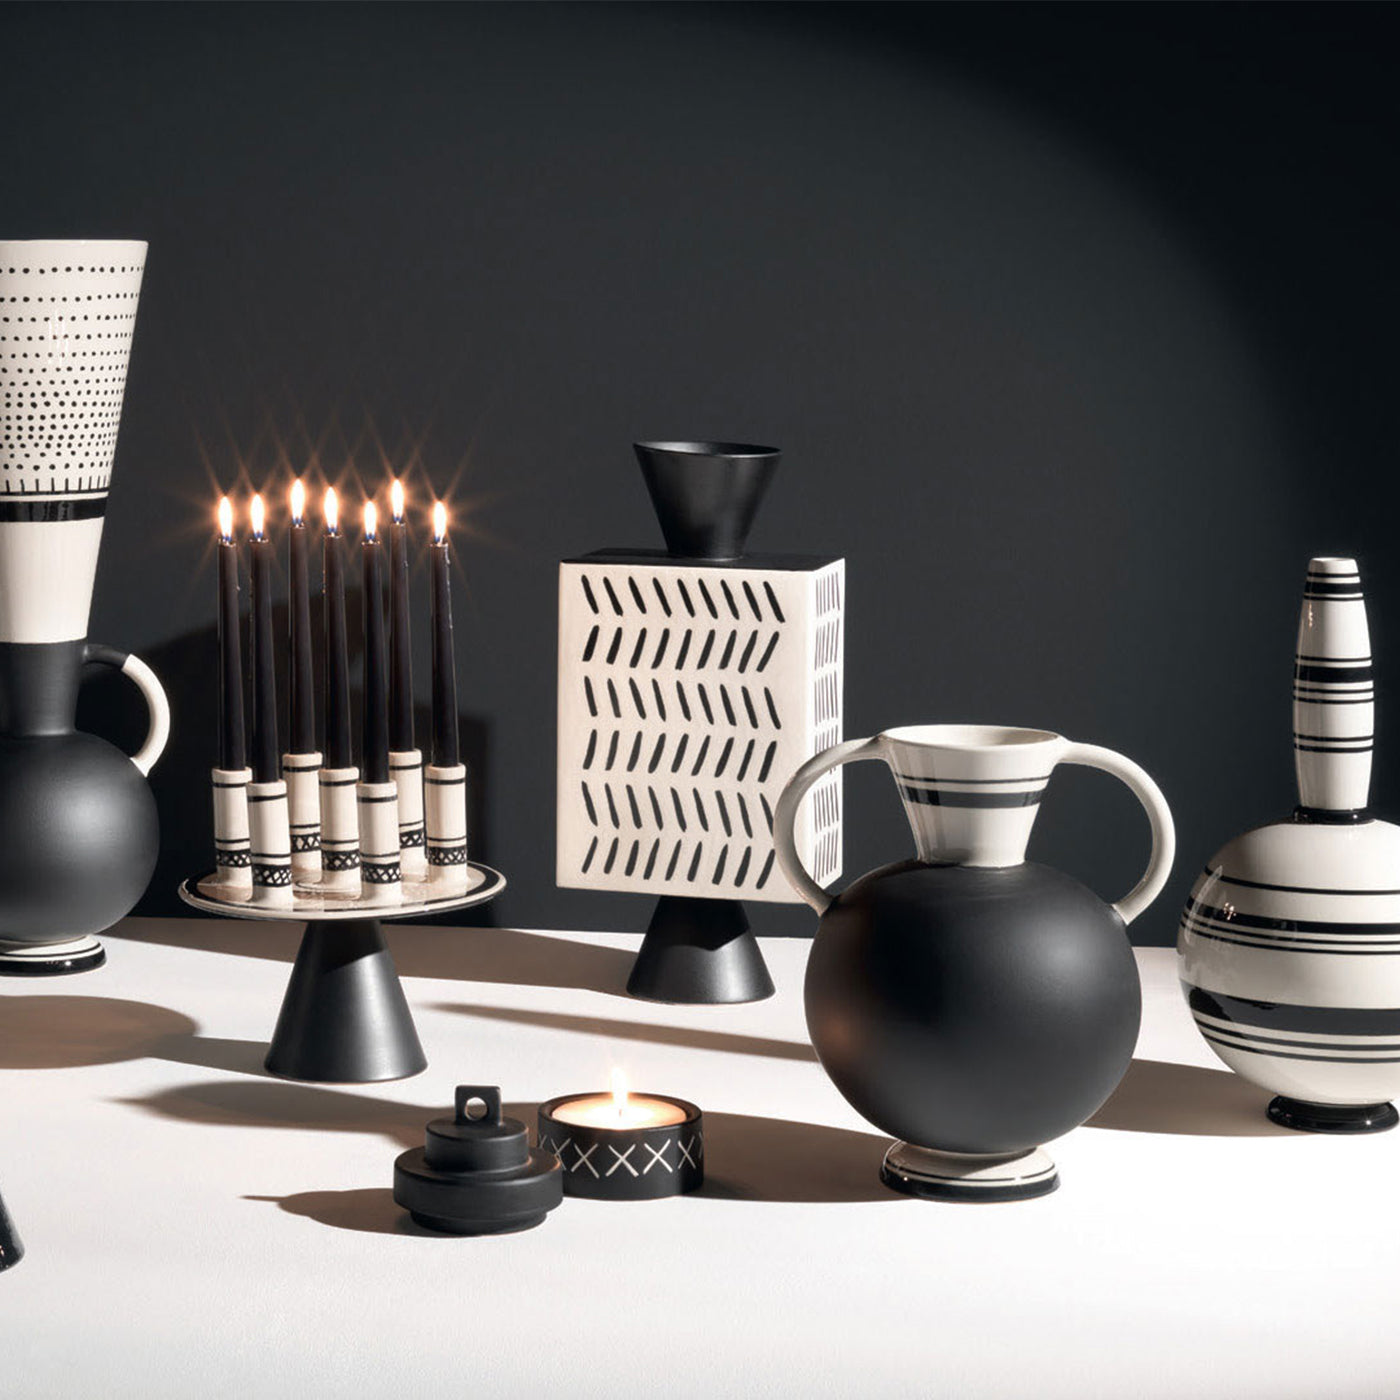 Situla Black And White Vase - Alternative view 1